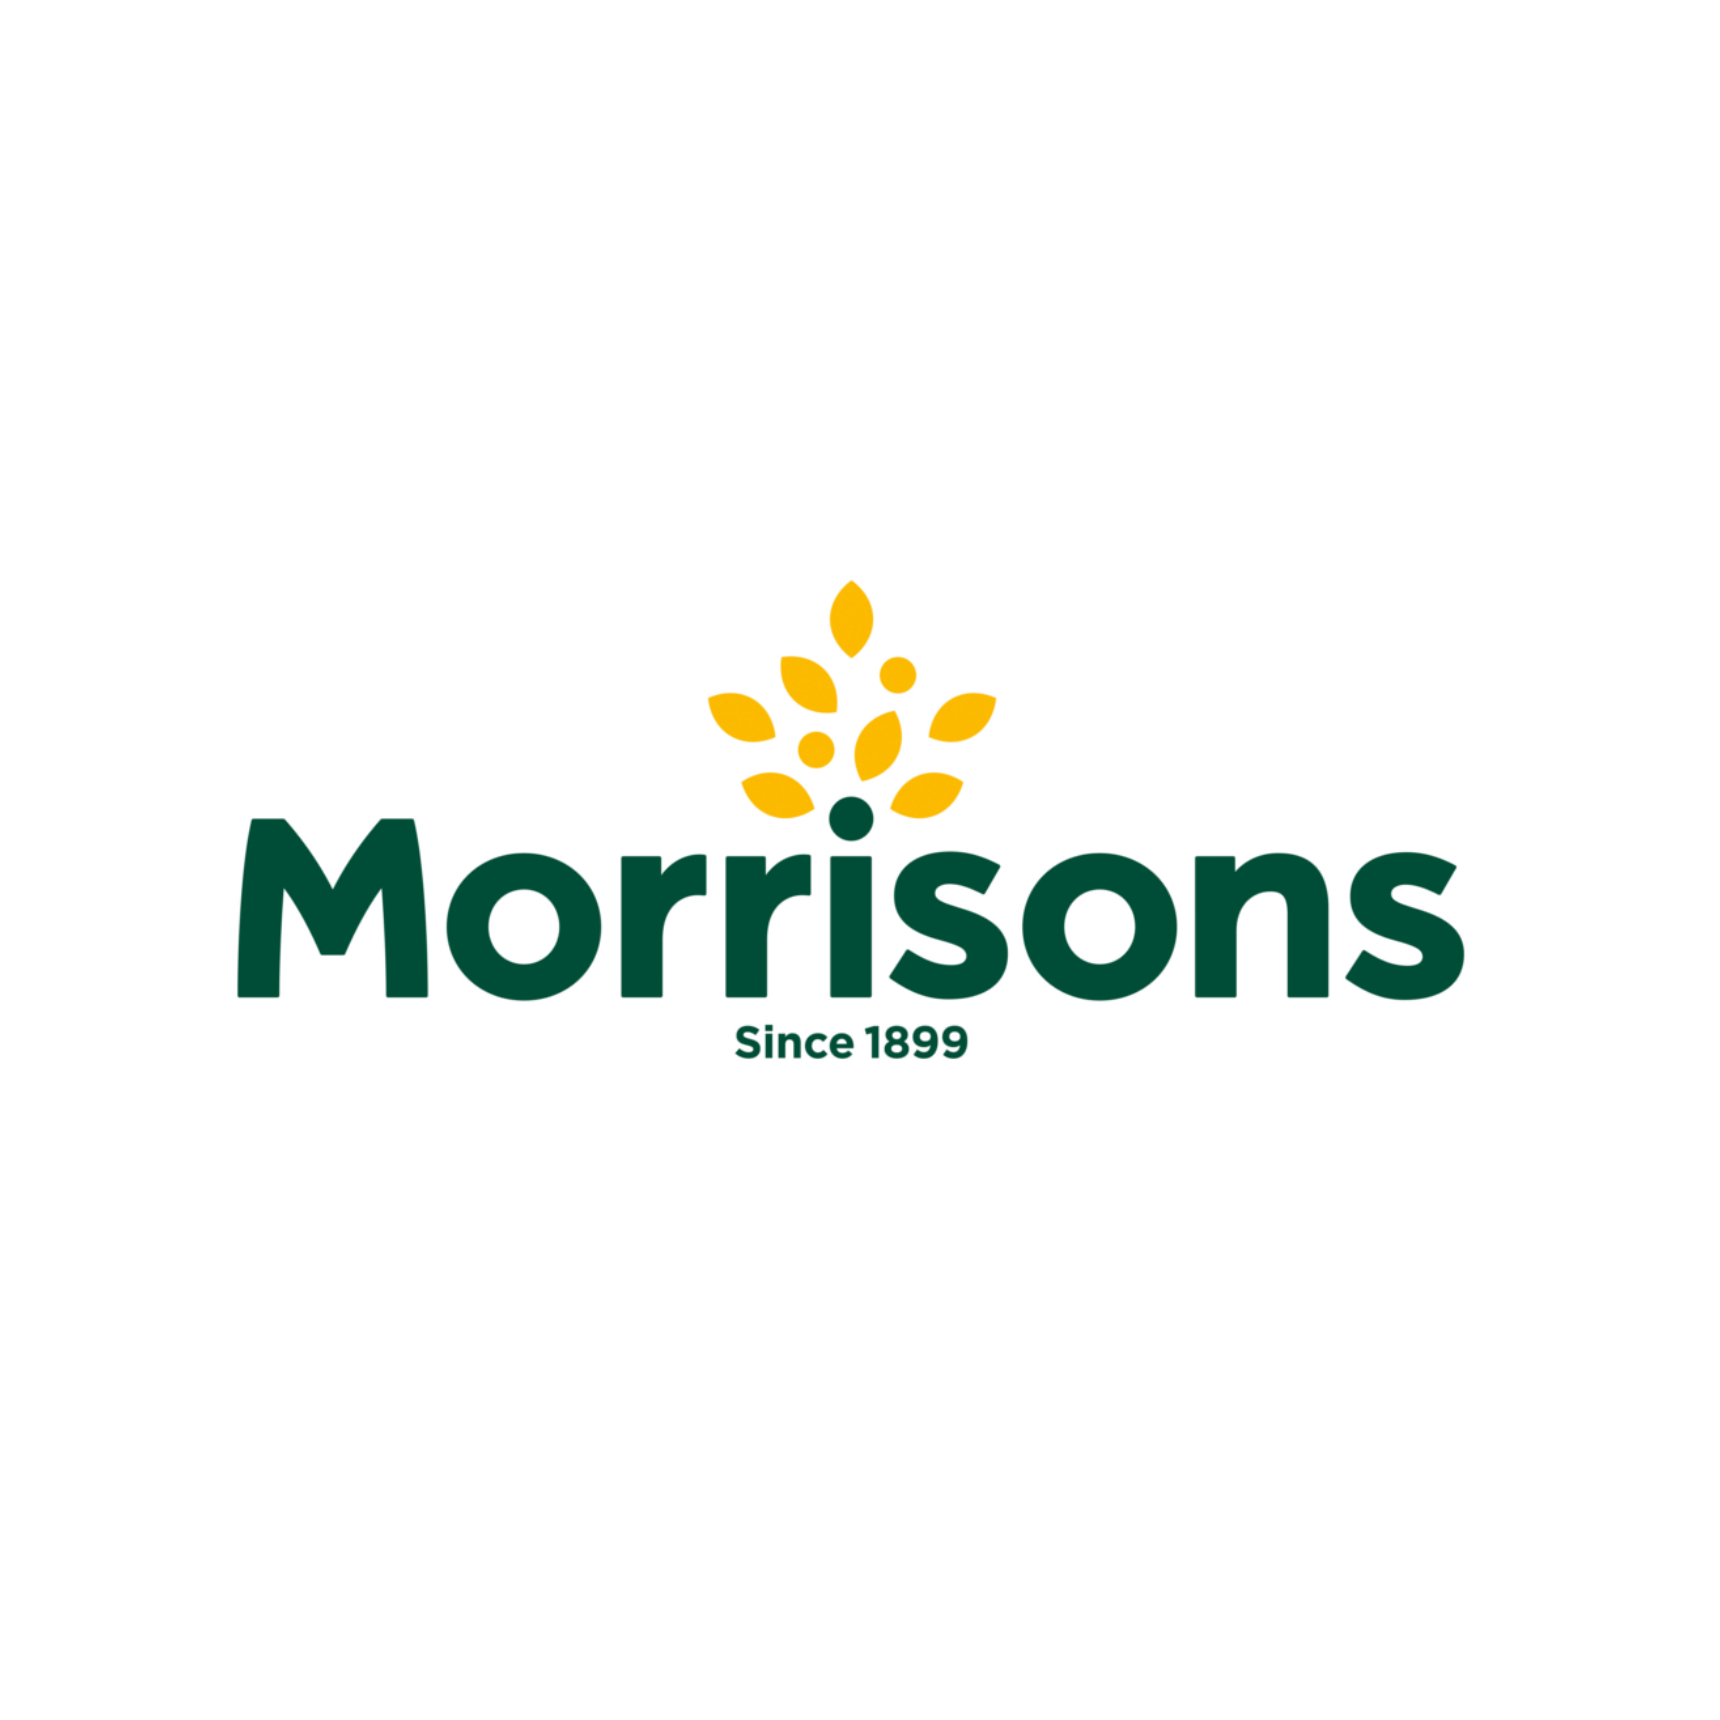 Morrisons to reserve 5% 'deposit' on online orders - here's what's happening and how it affects you